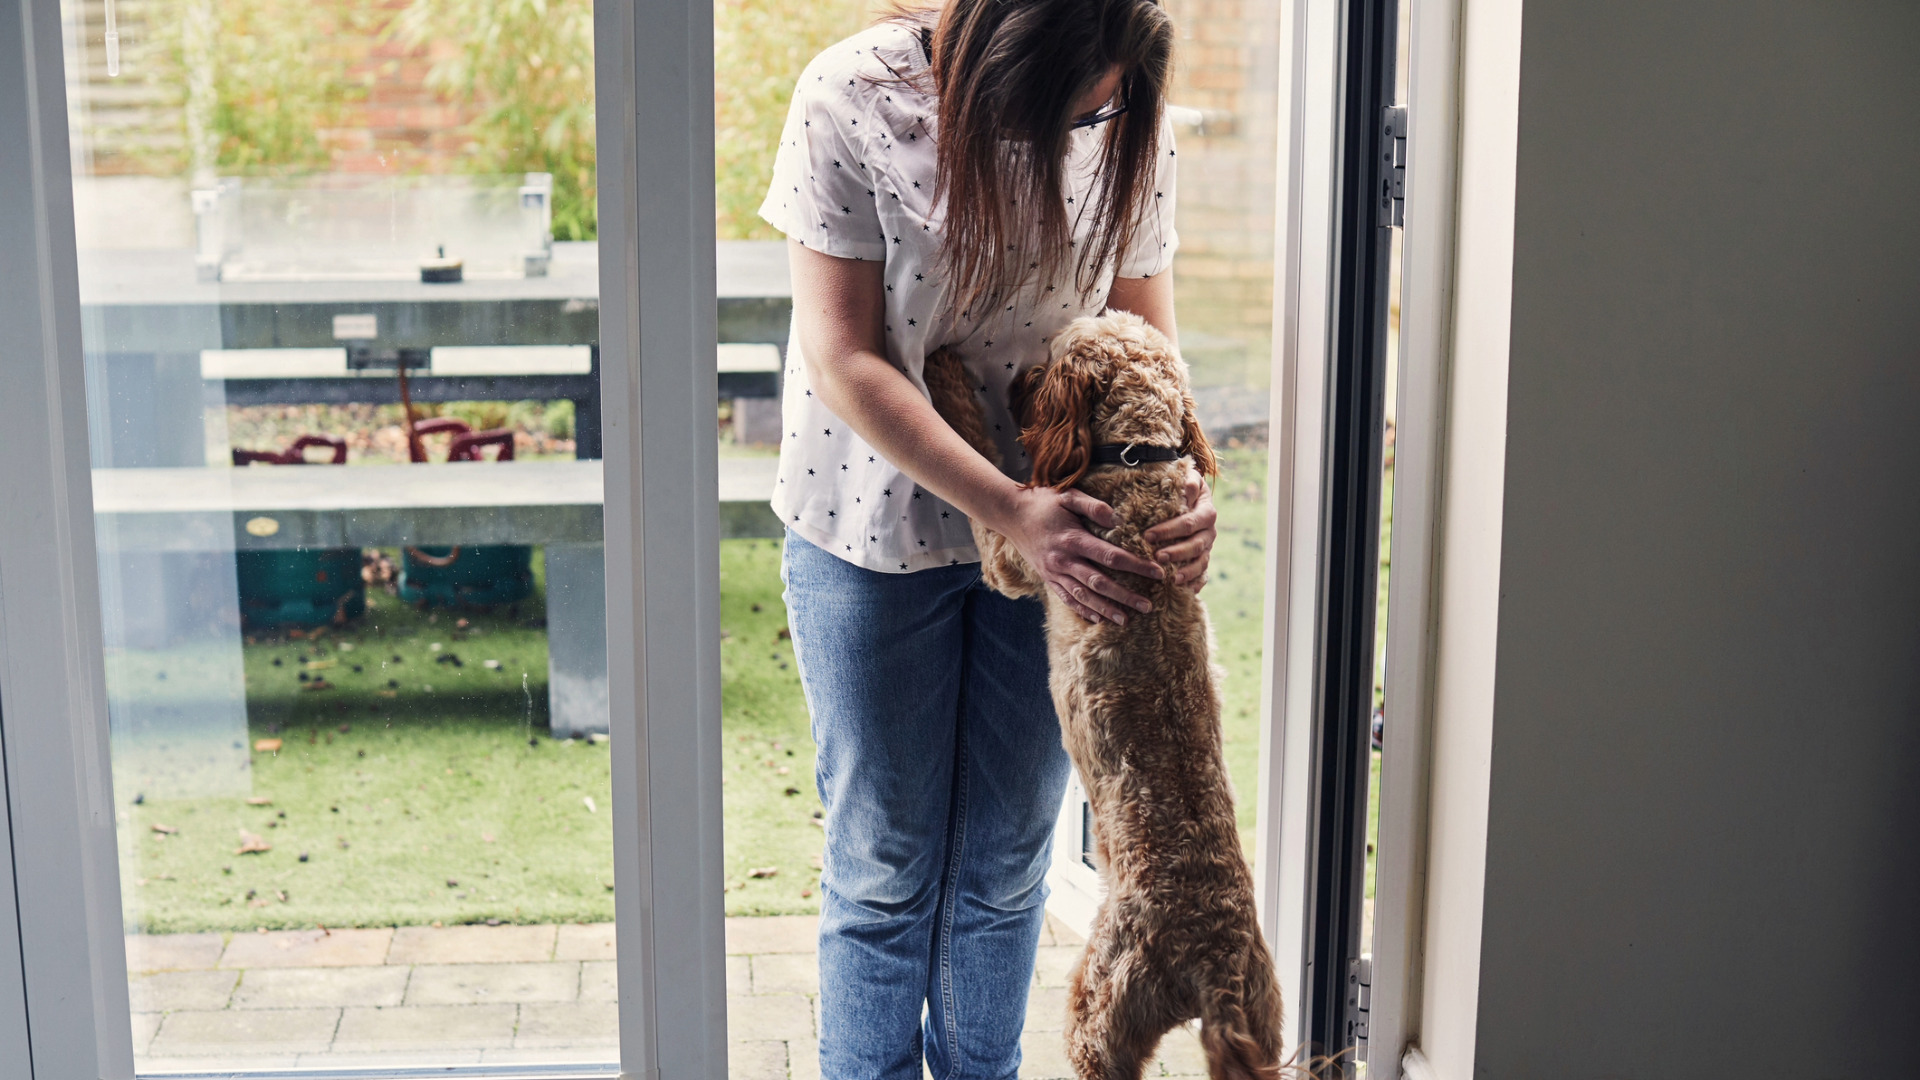 dog excitedly greets woman at door